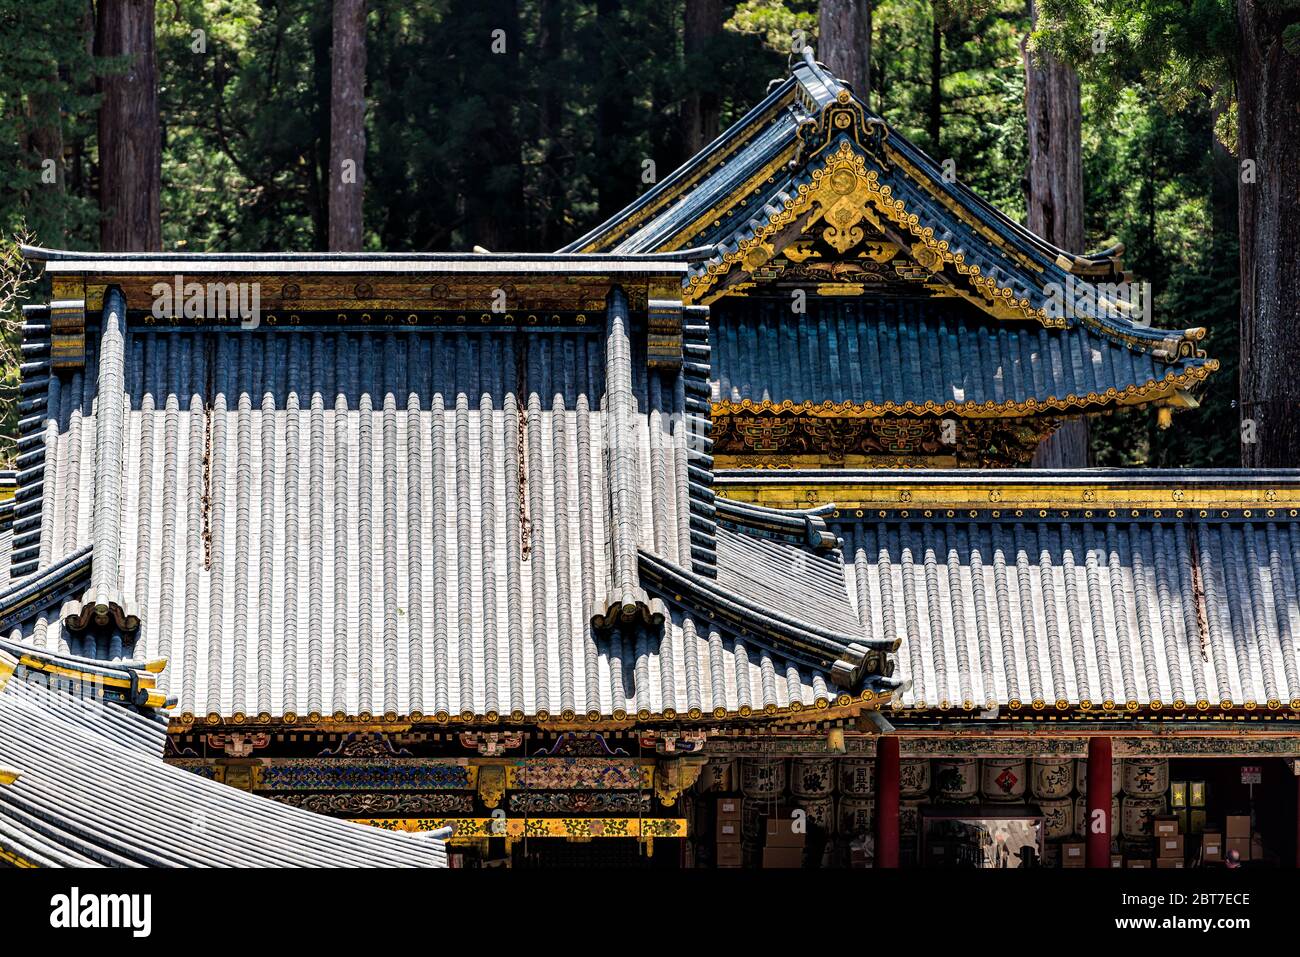 Nikko, Japan - April 5, 2019: Toshogu temple shrine roof architecture abstract view in Tochigi prefecture during spring and trees in forest Stock Photo